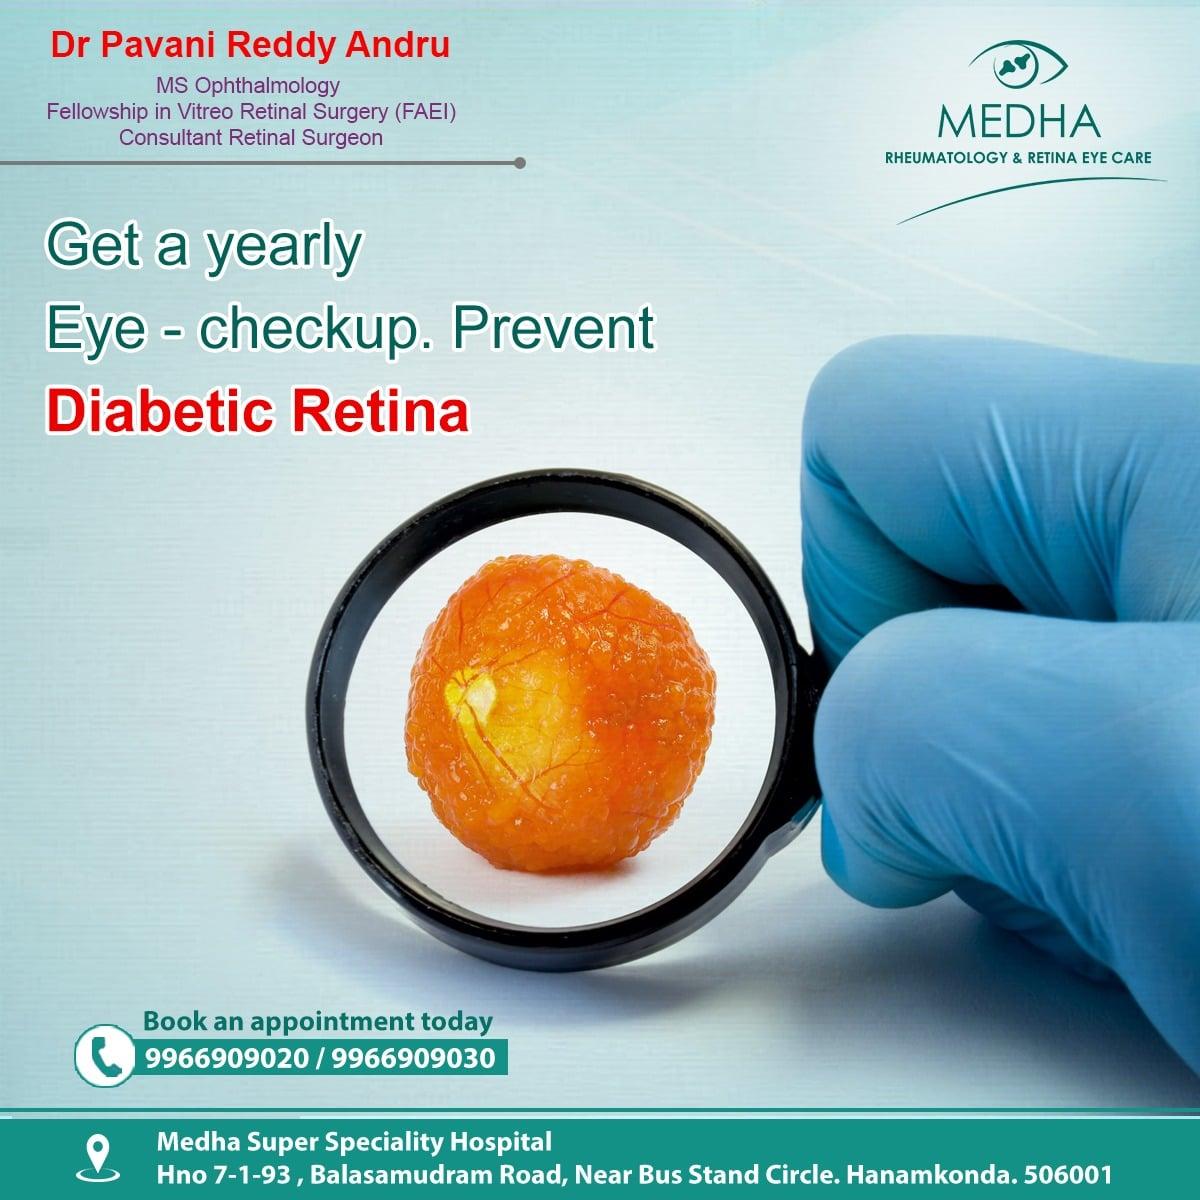 Get Yearly Checkup, Prevent DIABETIC RETINA